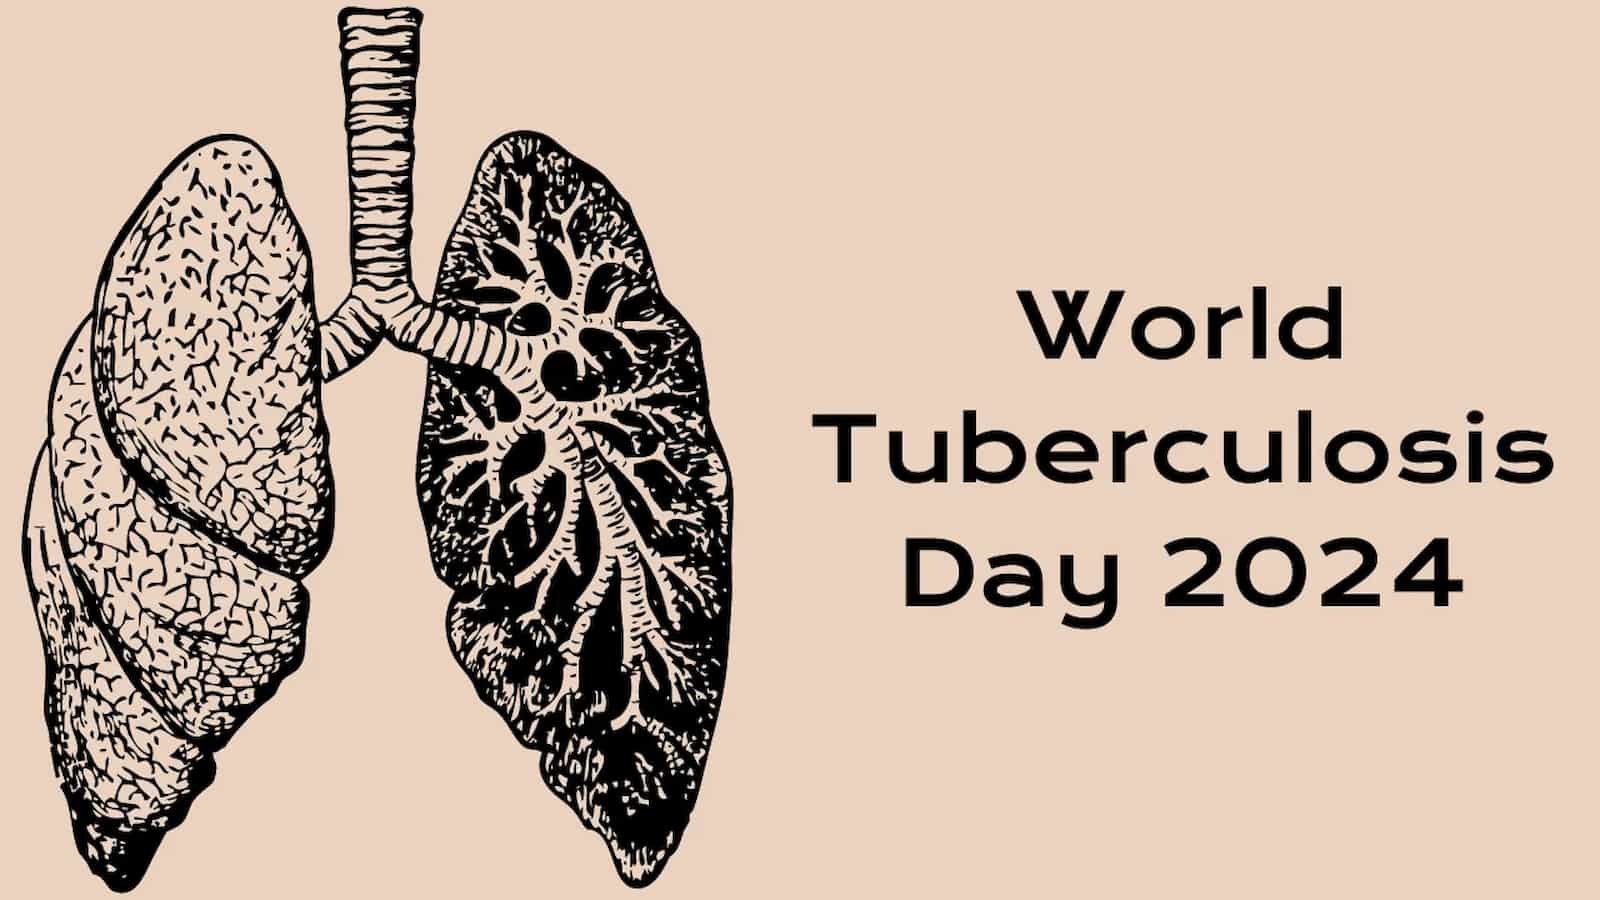 World Tuberculosis Day 2024 (US) Activities and Dates